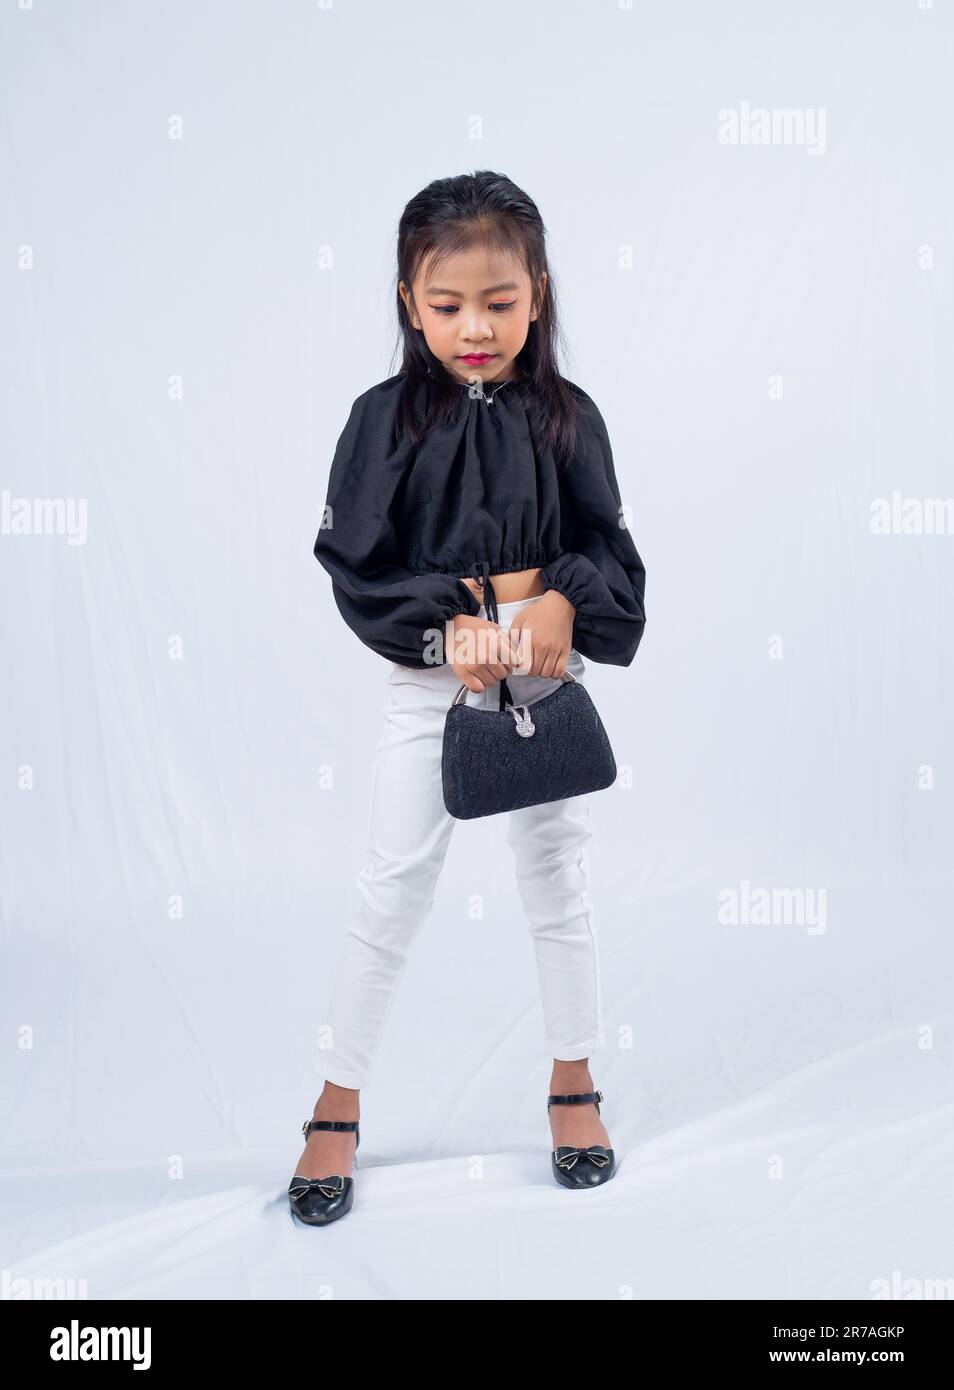 An Asian girl is dressed in a black and white outfit, featuring a long-sleeved top and matching skirt Stock Photo